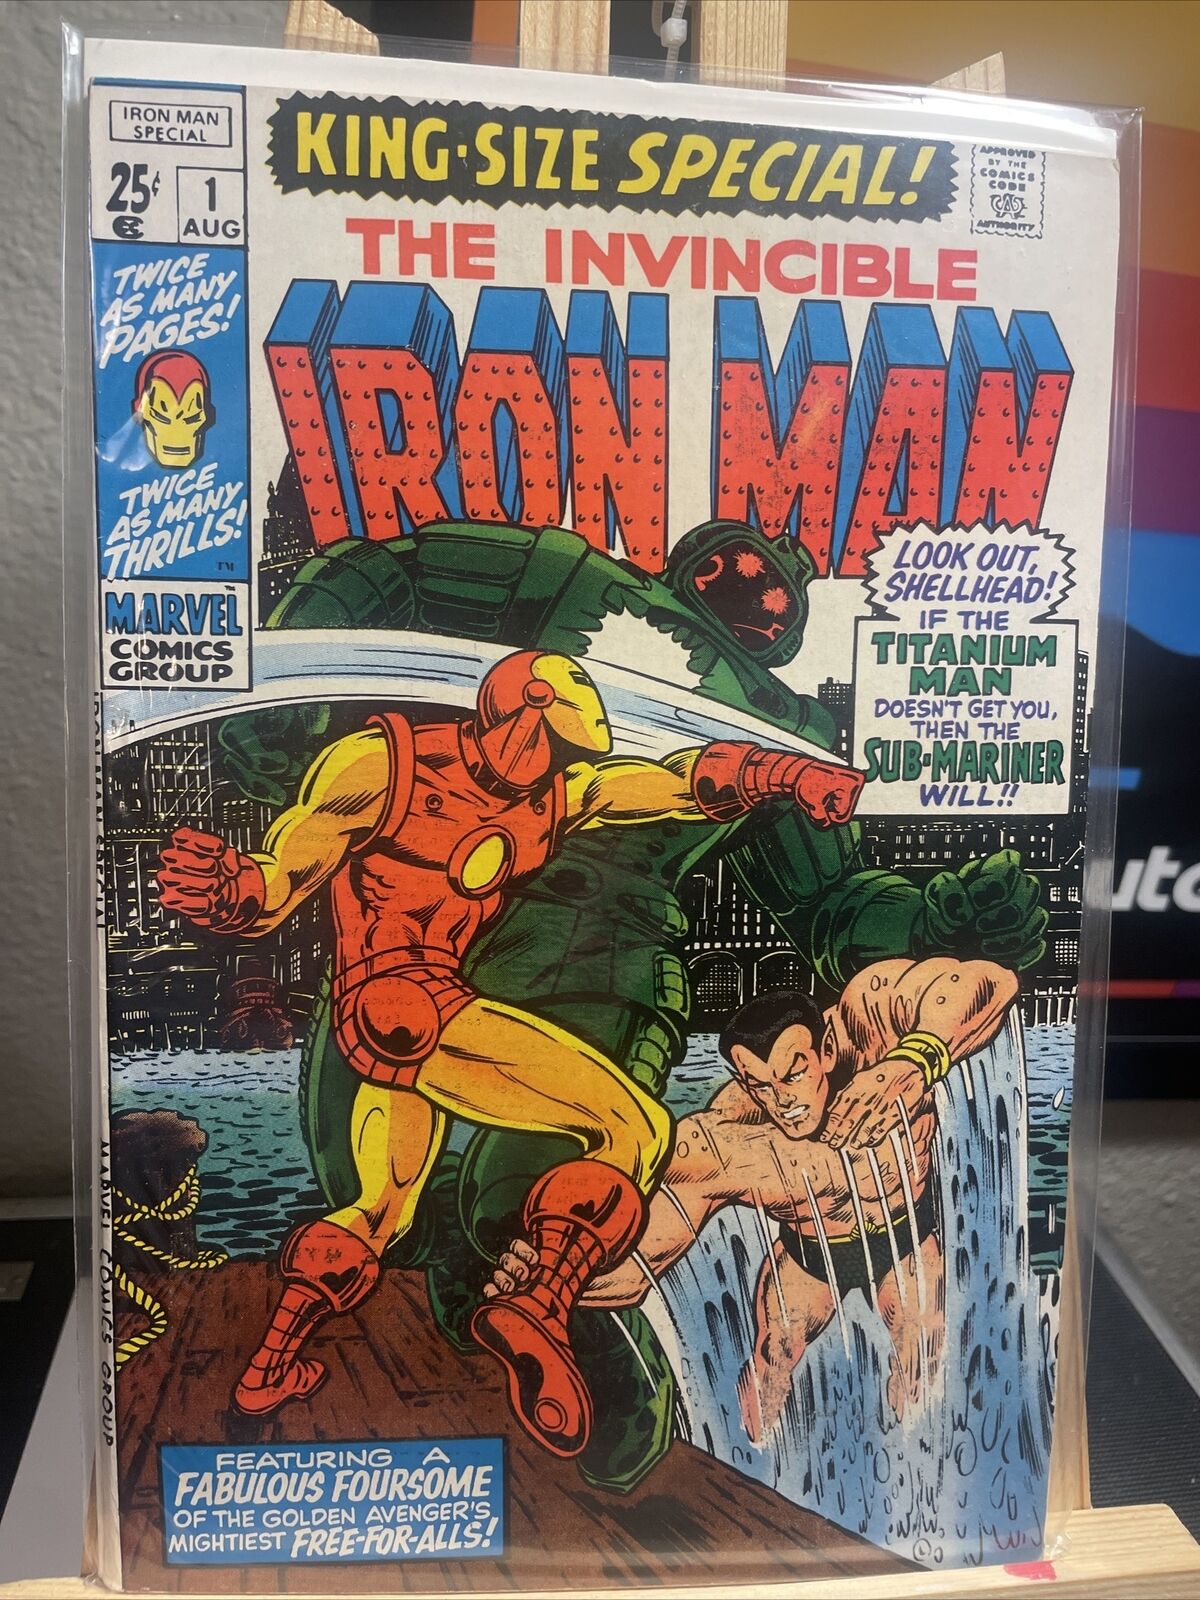 1970 Iron Man #1 King Size Special Marvel Comic